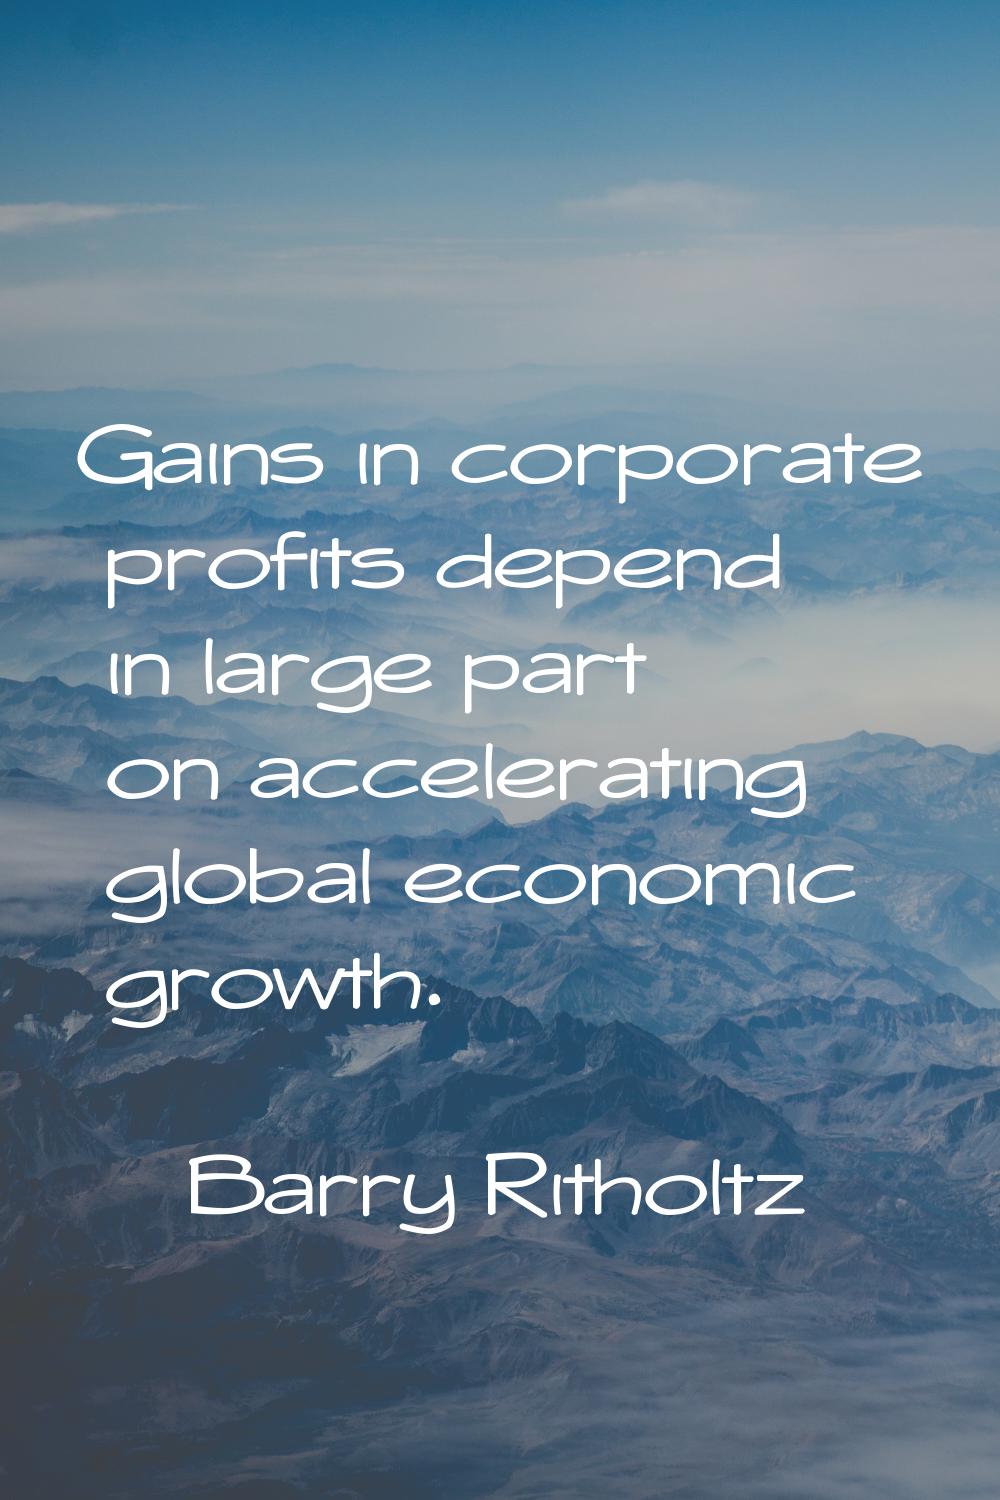 Gains in corporate profits depend in large part on accelerating global economic growth.